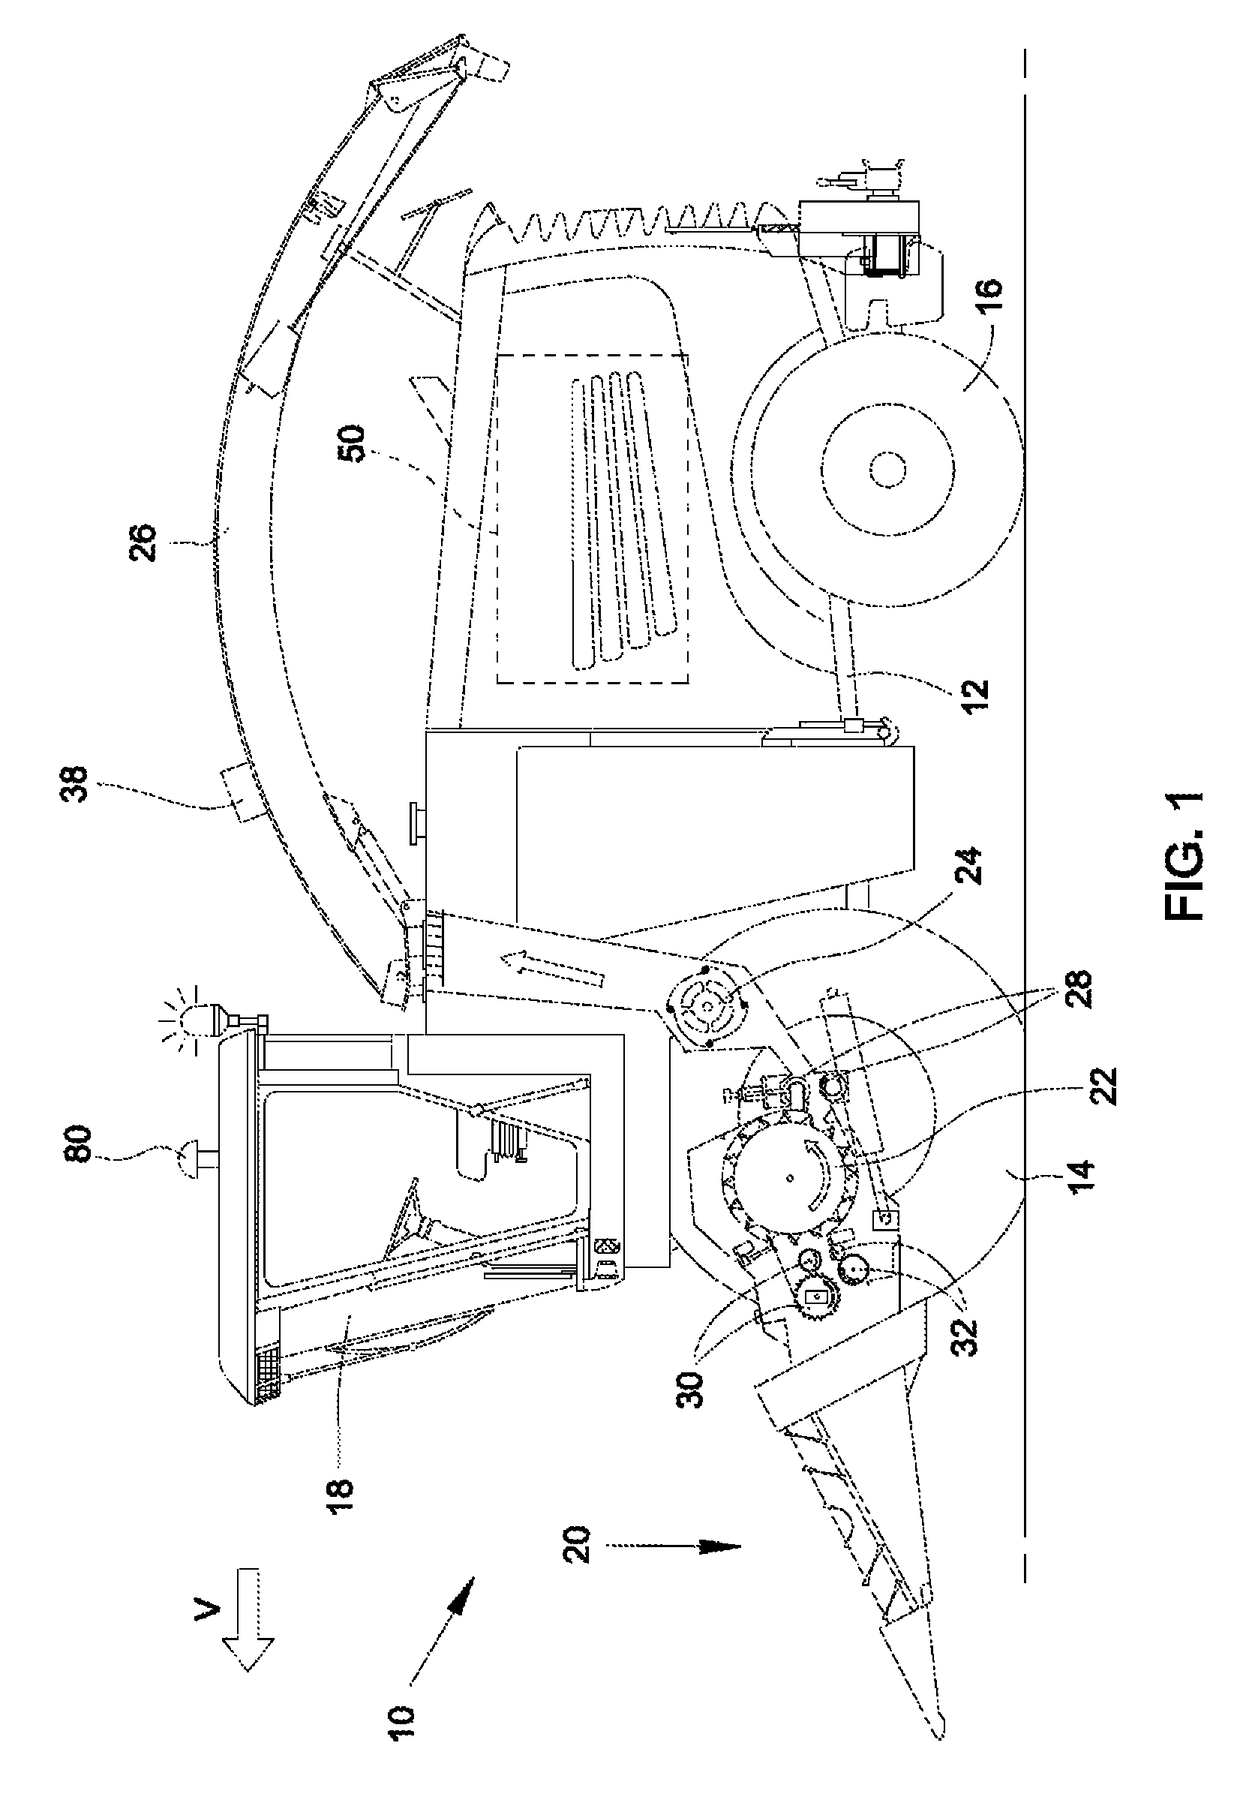 Operator assistance system for an agricultural machine